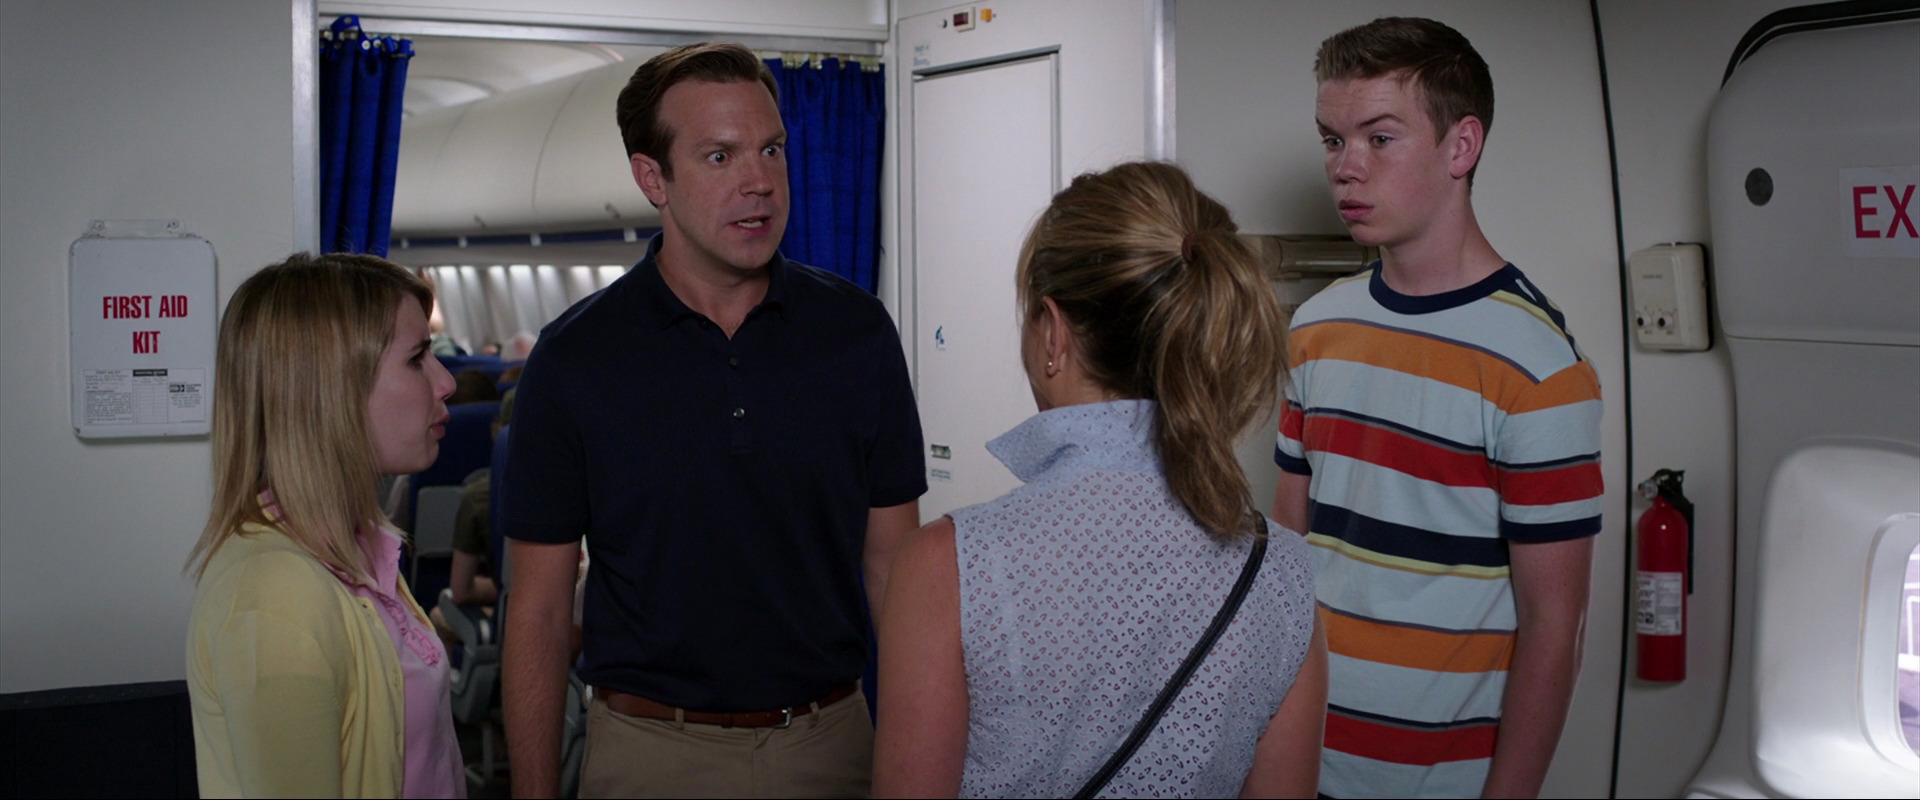 Screen Captures - were-the-millers-0273 - Will Poulter Photo Gallery.